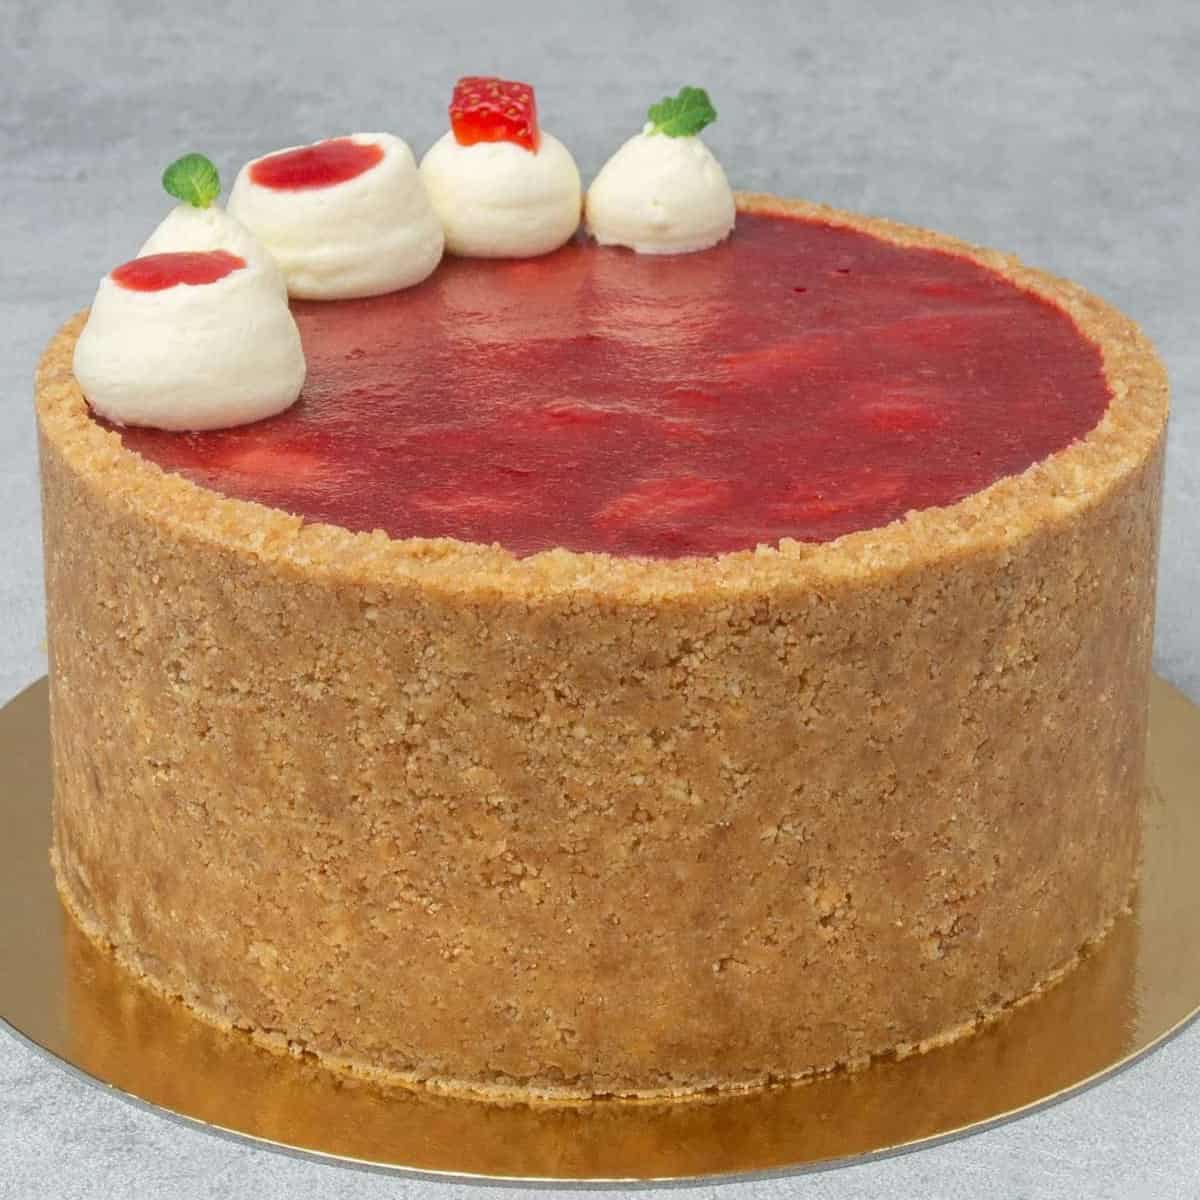 <p><strong><a href="https://www.spatuladesserts.com/easy-no-bake-strawberry-cheesecake/">No bake Strawberry Cheesecake</a> </strong>with Graham cracker crust is one of the most popular desserts all around the world and no wonder why! It is phenomenal as the silky ultra-creamy cheese filling meets the fruity strawberry compote in the crunchy, sweet Graham cracker crust. This is an absolutely no-fuss Strawberry cheesecake recipe, no baking involved, no issue around the water bath, you do not even have to turn the oven on.</p> <p><strong>Go to the recipe: <a href="https://www.spatuladesserts.com/easy-no-bake-strawberry-cheesecake/">No Bake Strawberry Cheesecake</a></strong></p>